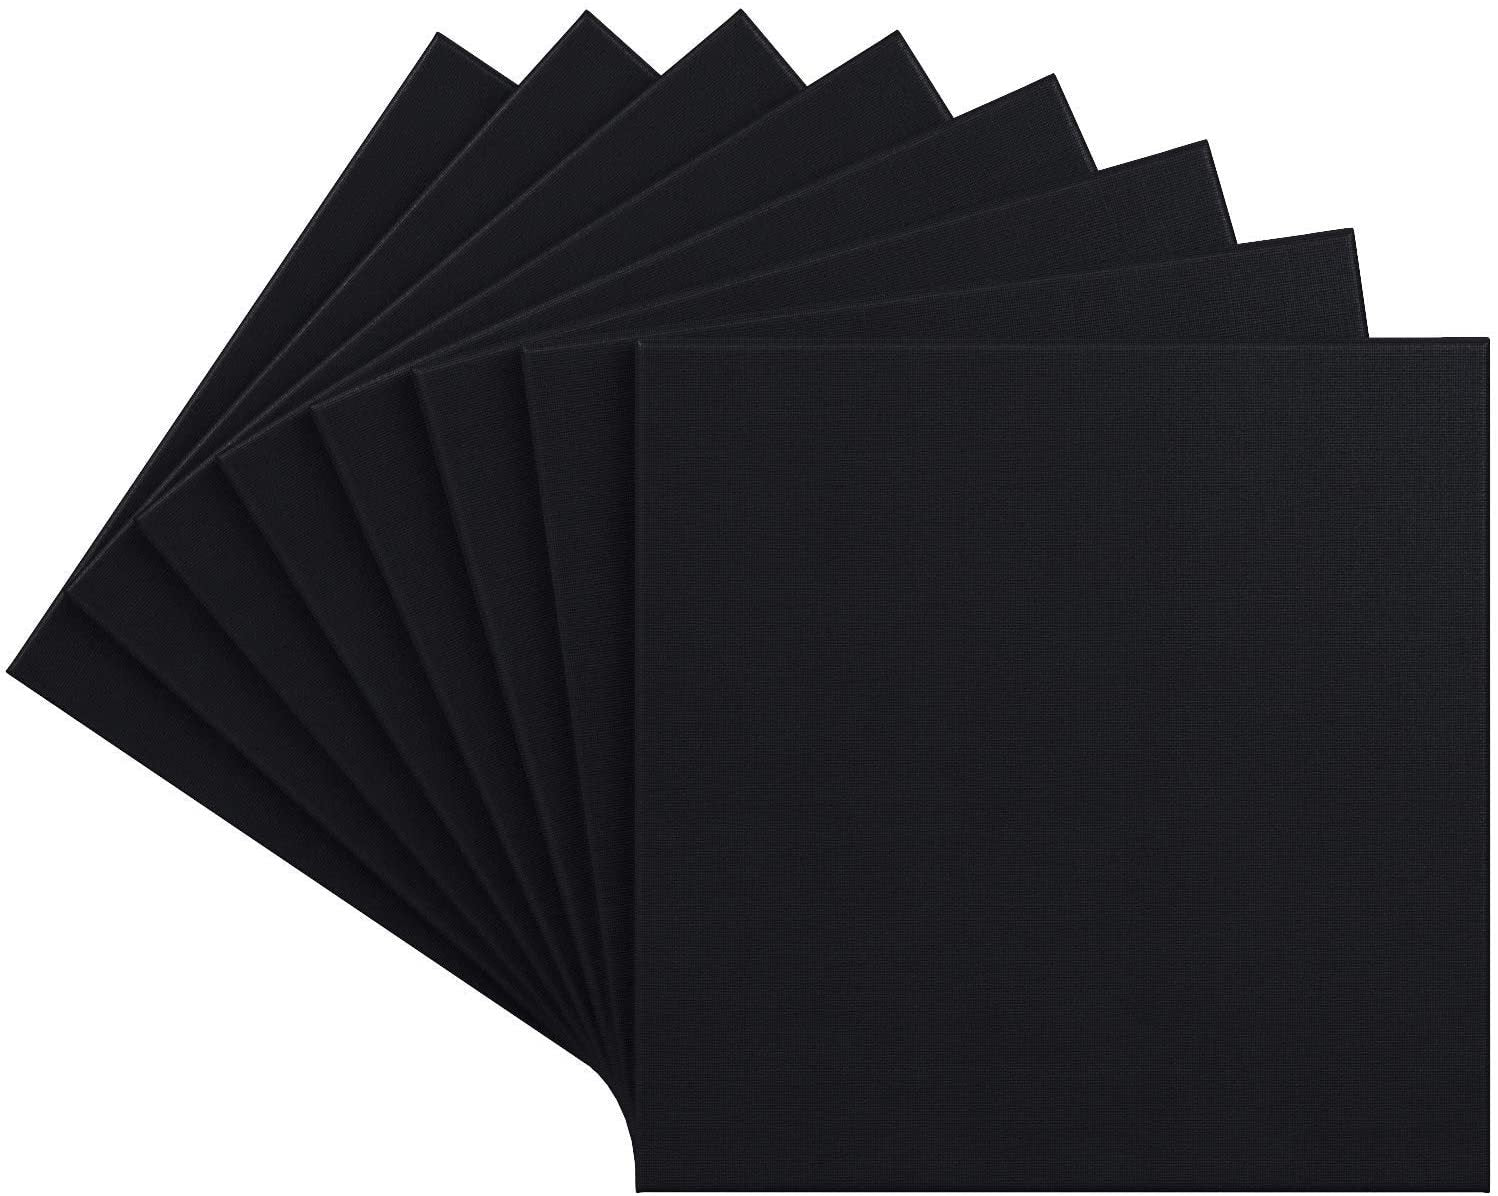 ZingArts Black Canvas,12x12 Inch 6-Pack, 100% Cotton Primed Acid-Free  Stretched Black canvases for Painting, Art Supplies for Acrylic Pouring,  Oil